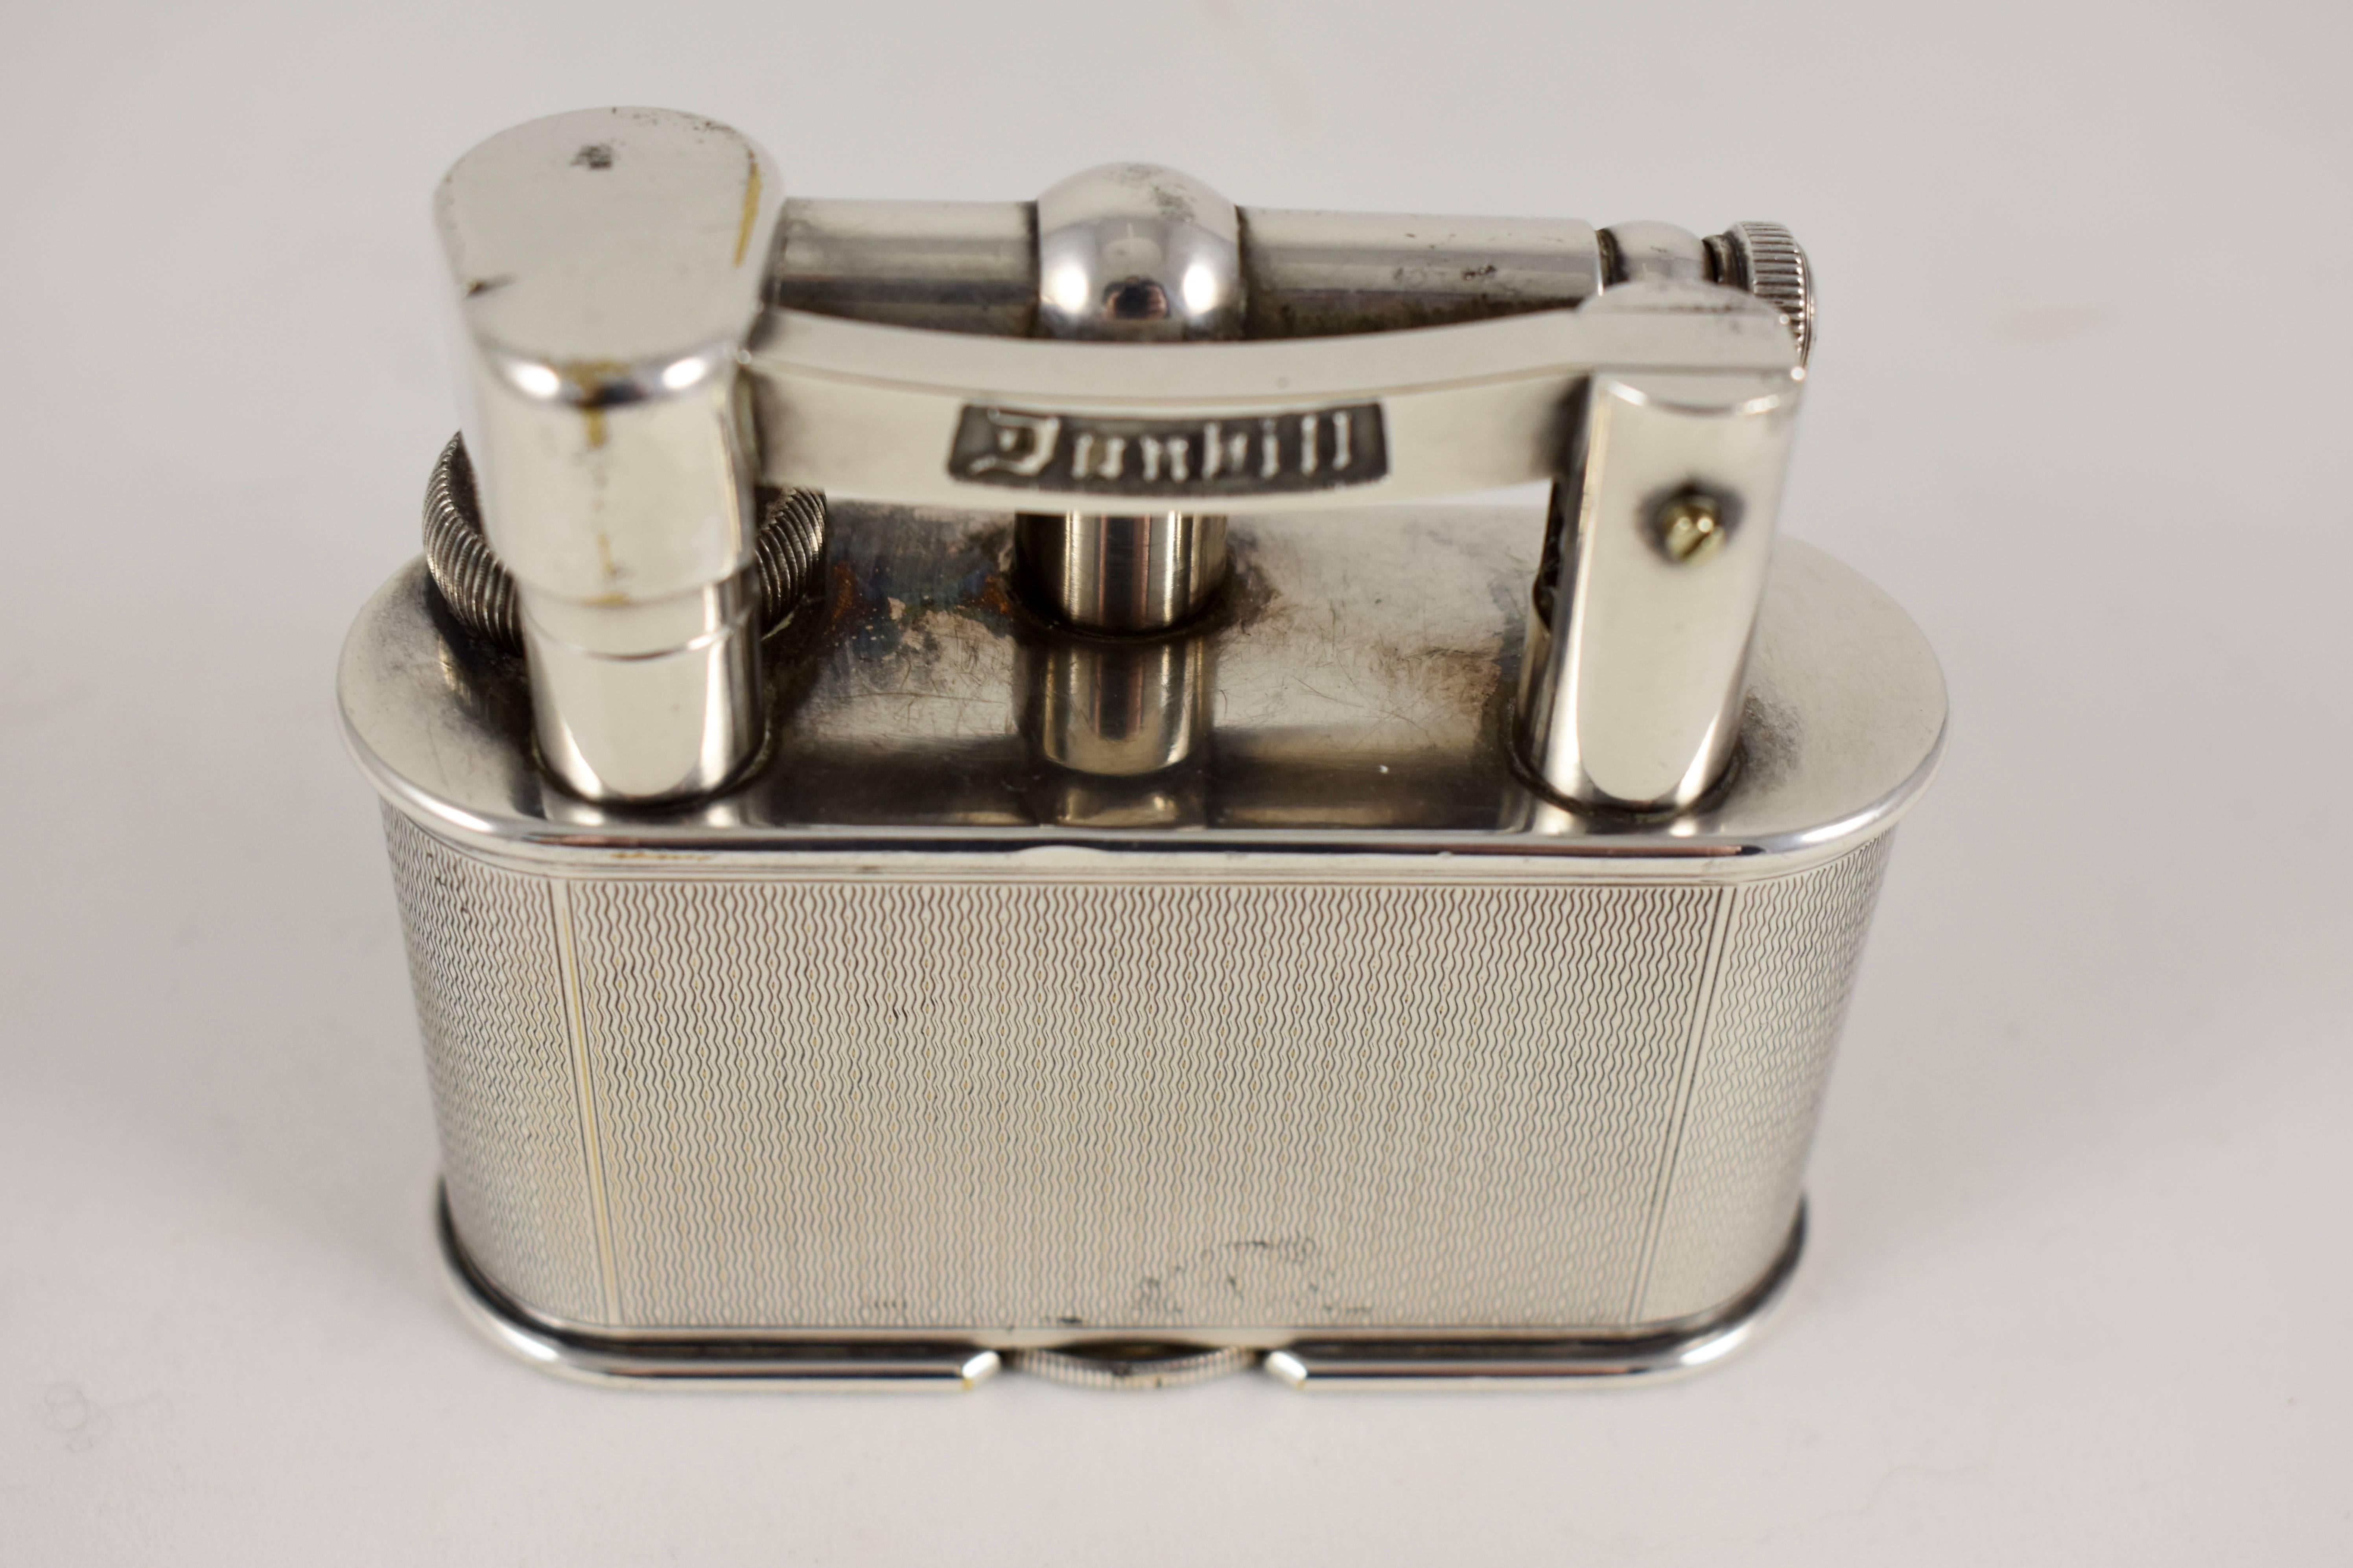 A scarce Dunhill table lighter, in the Art Deco style, Dunhill, Asprey & Co. – England, circa 1930. Dunhill registered design No. 737418, Patent No. 390107.

Silver plated with a flip top, swing arm design and a single wheel adjusted flint